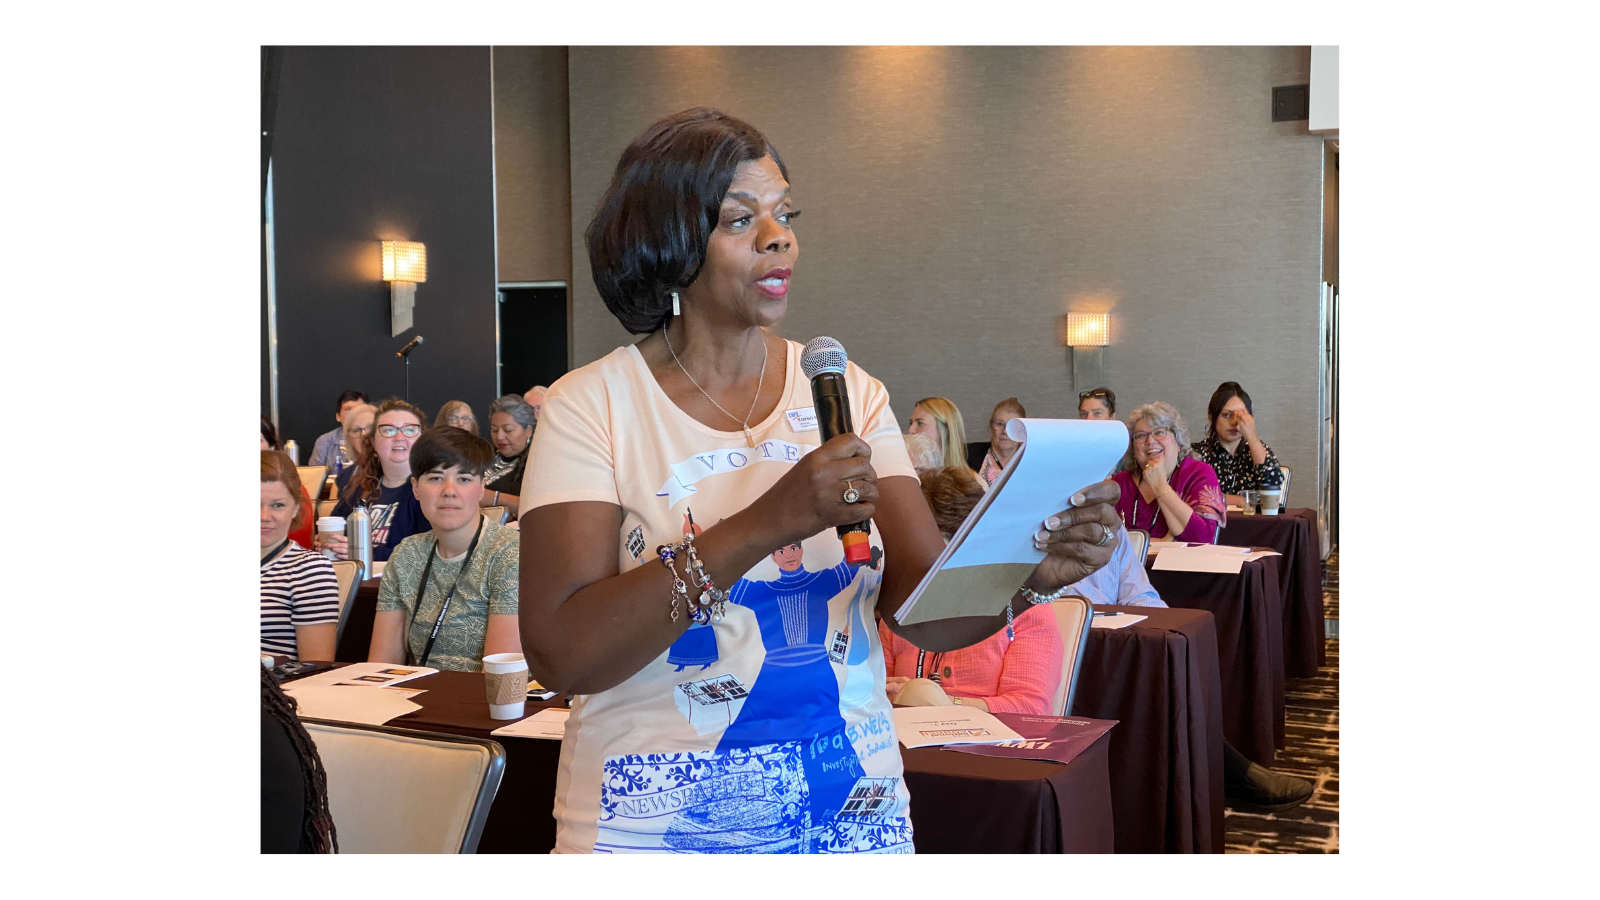 Attendee speaking during Friday's exercise: a game of telephone! They are holding a microphone and a pad of paper.